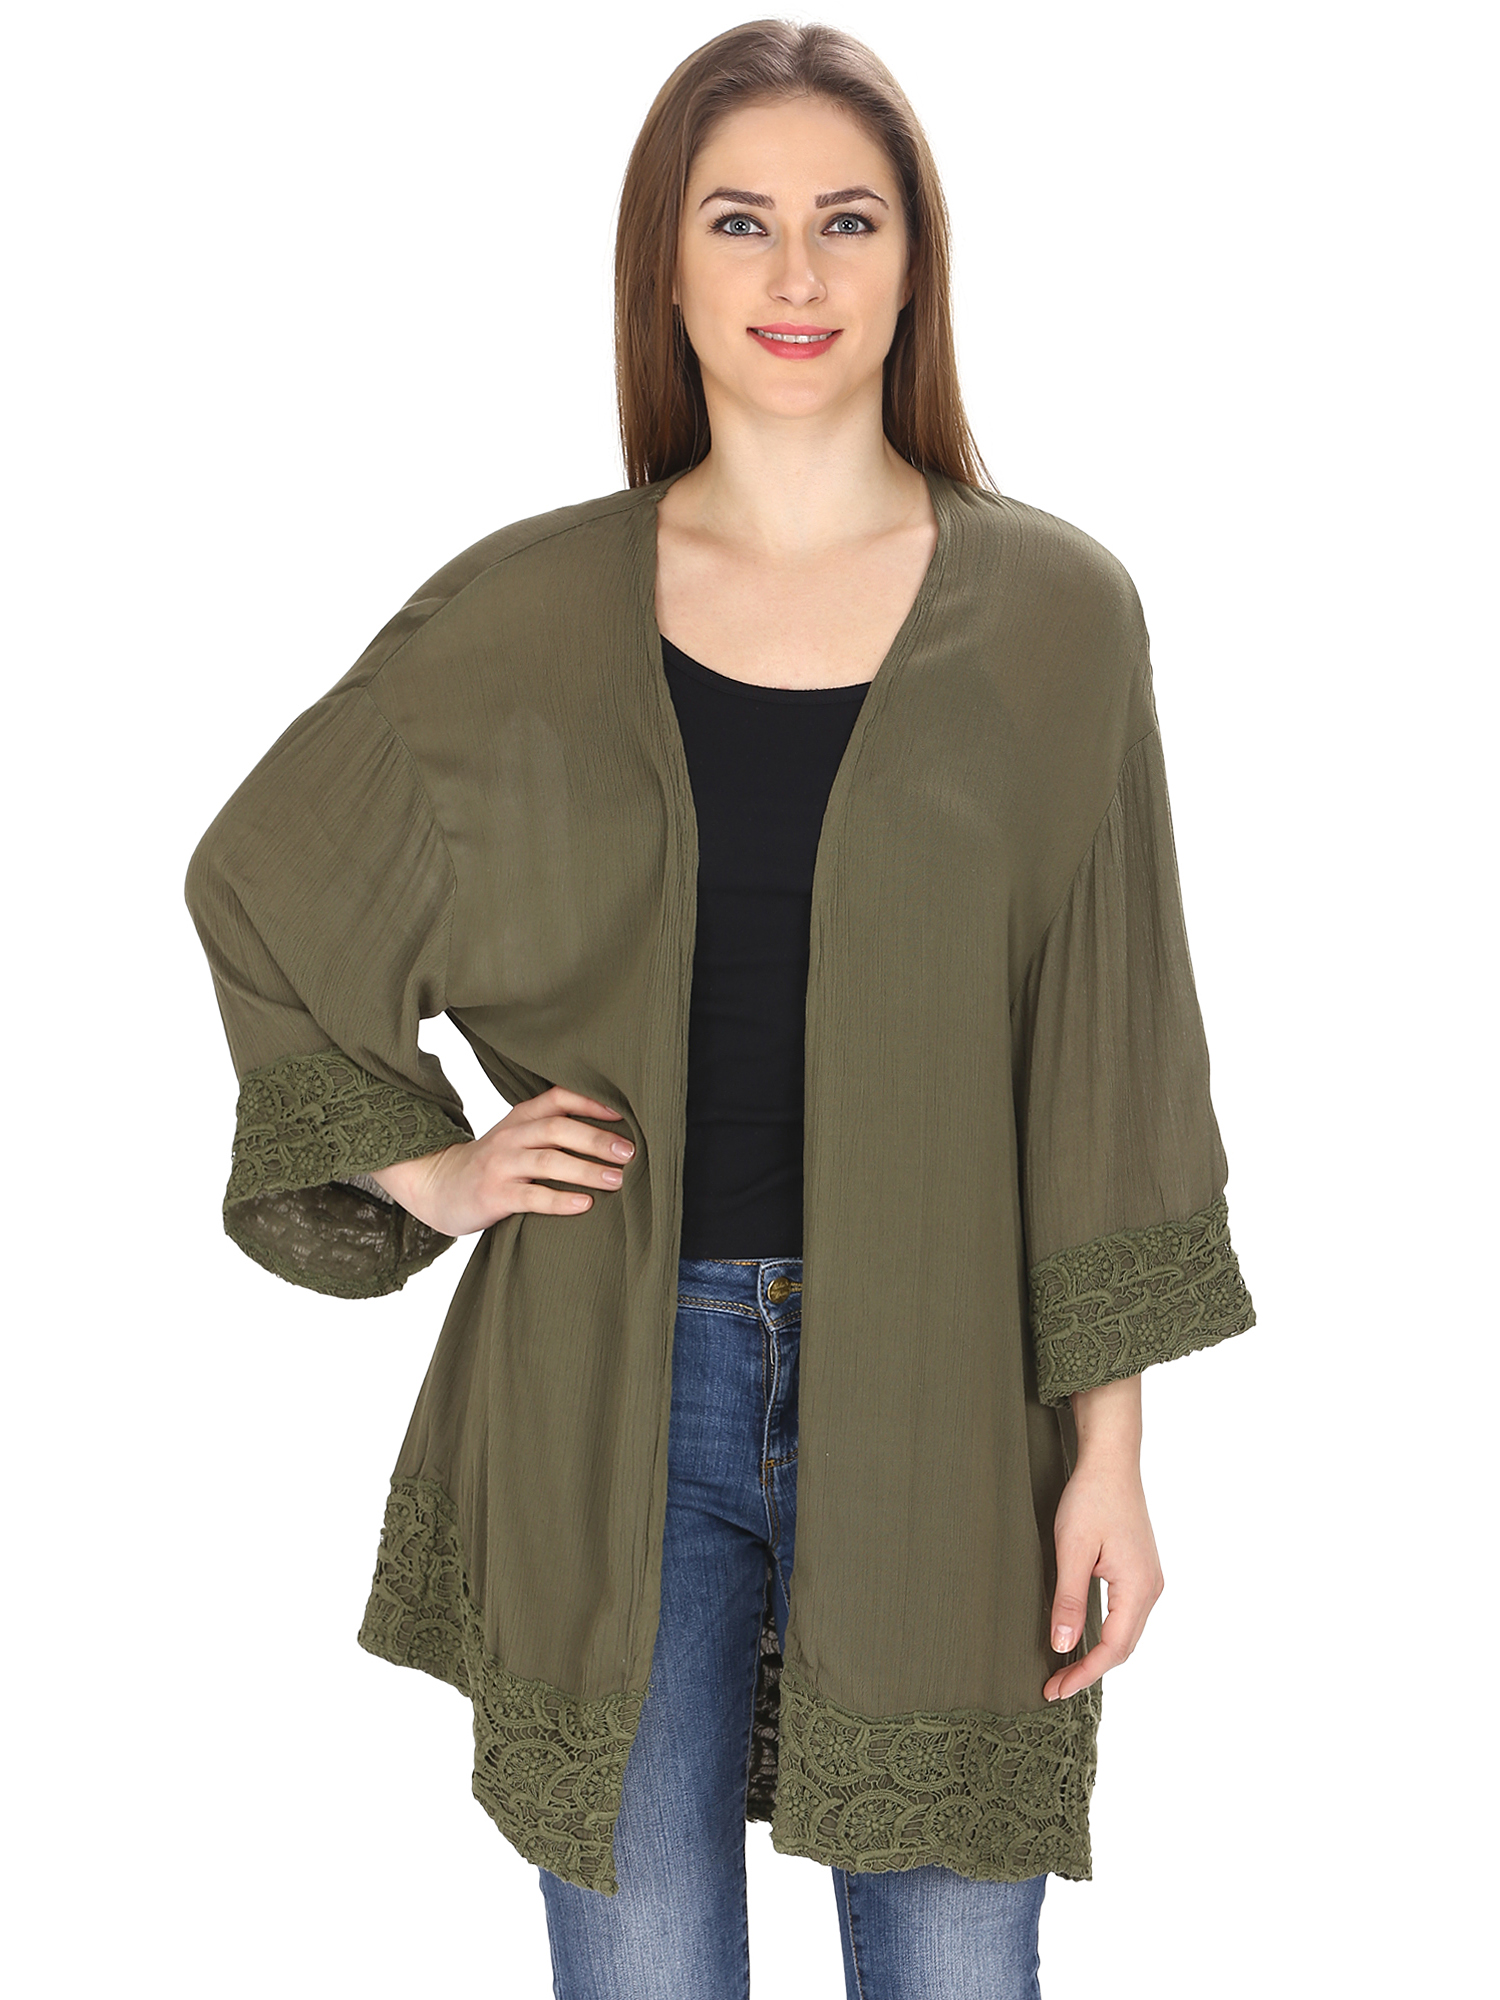 Buy MansiCollections Kimono Shrug Online @ ₹399 from ShopClues